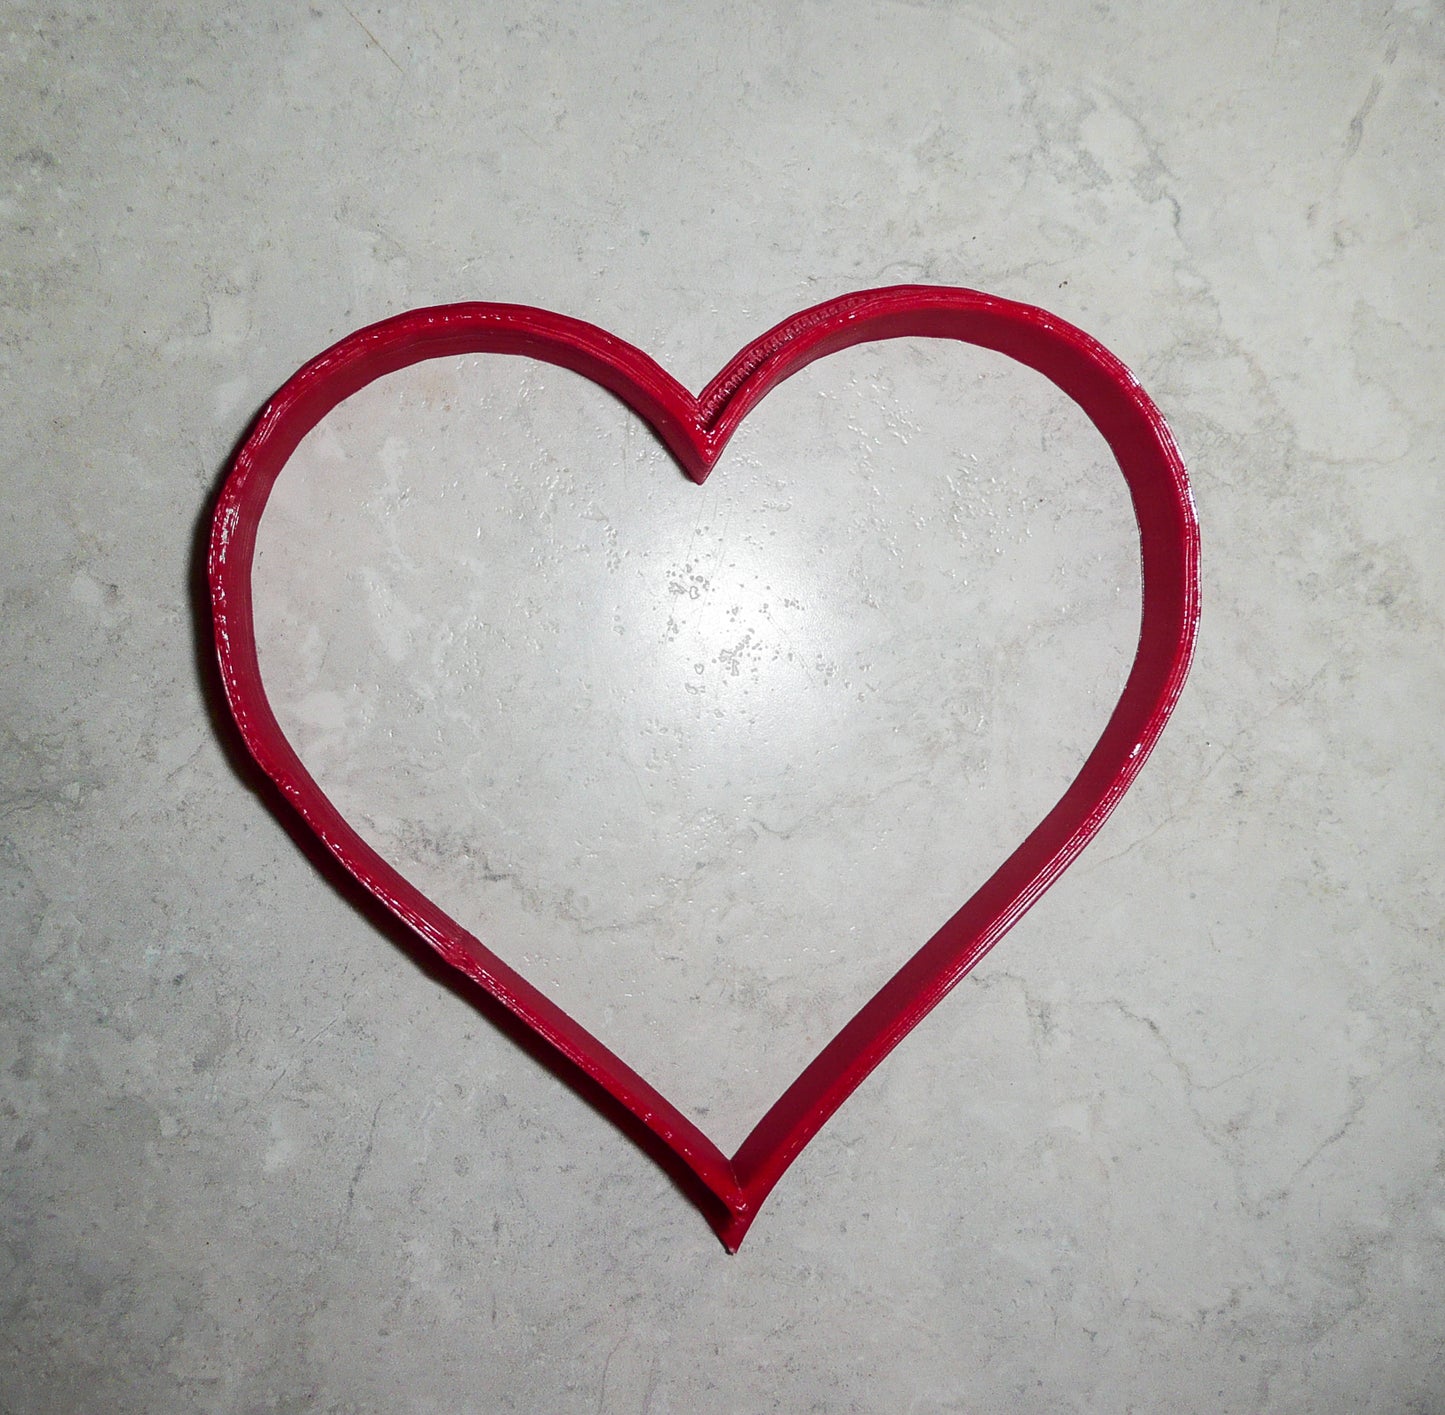 Heart Valentine Day Love Holiday Cookie Cutter Made in USA PR209